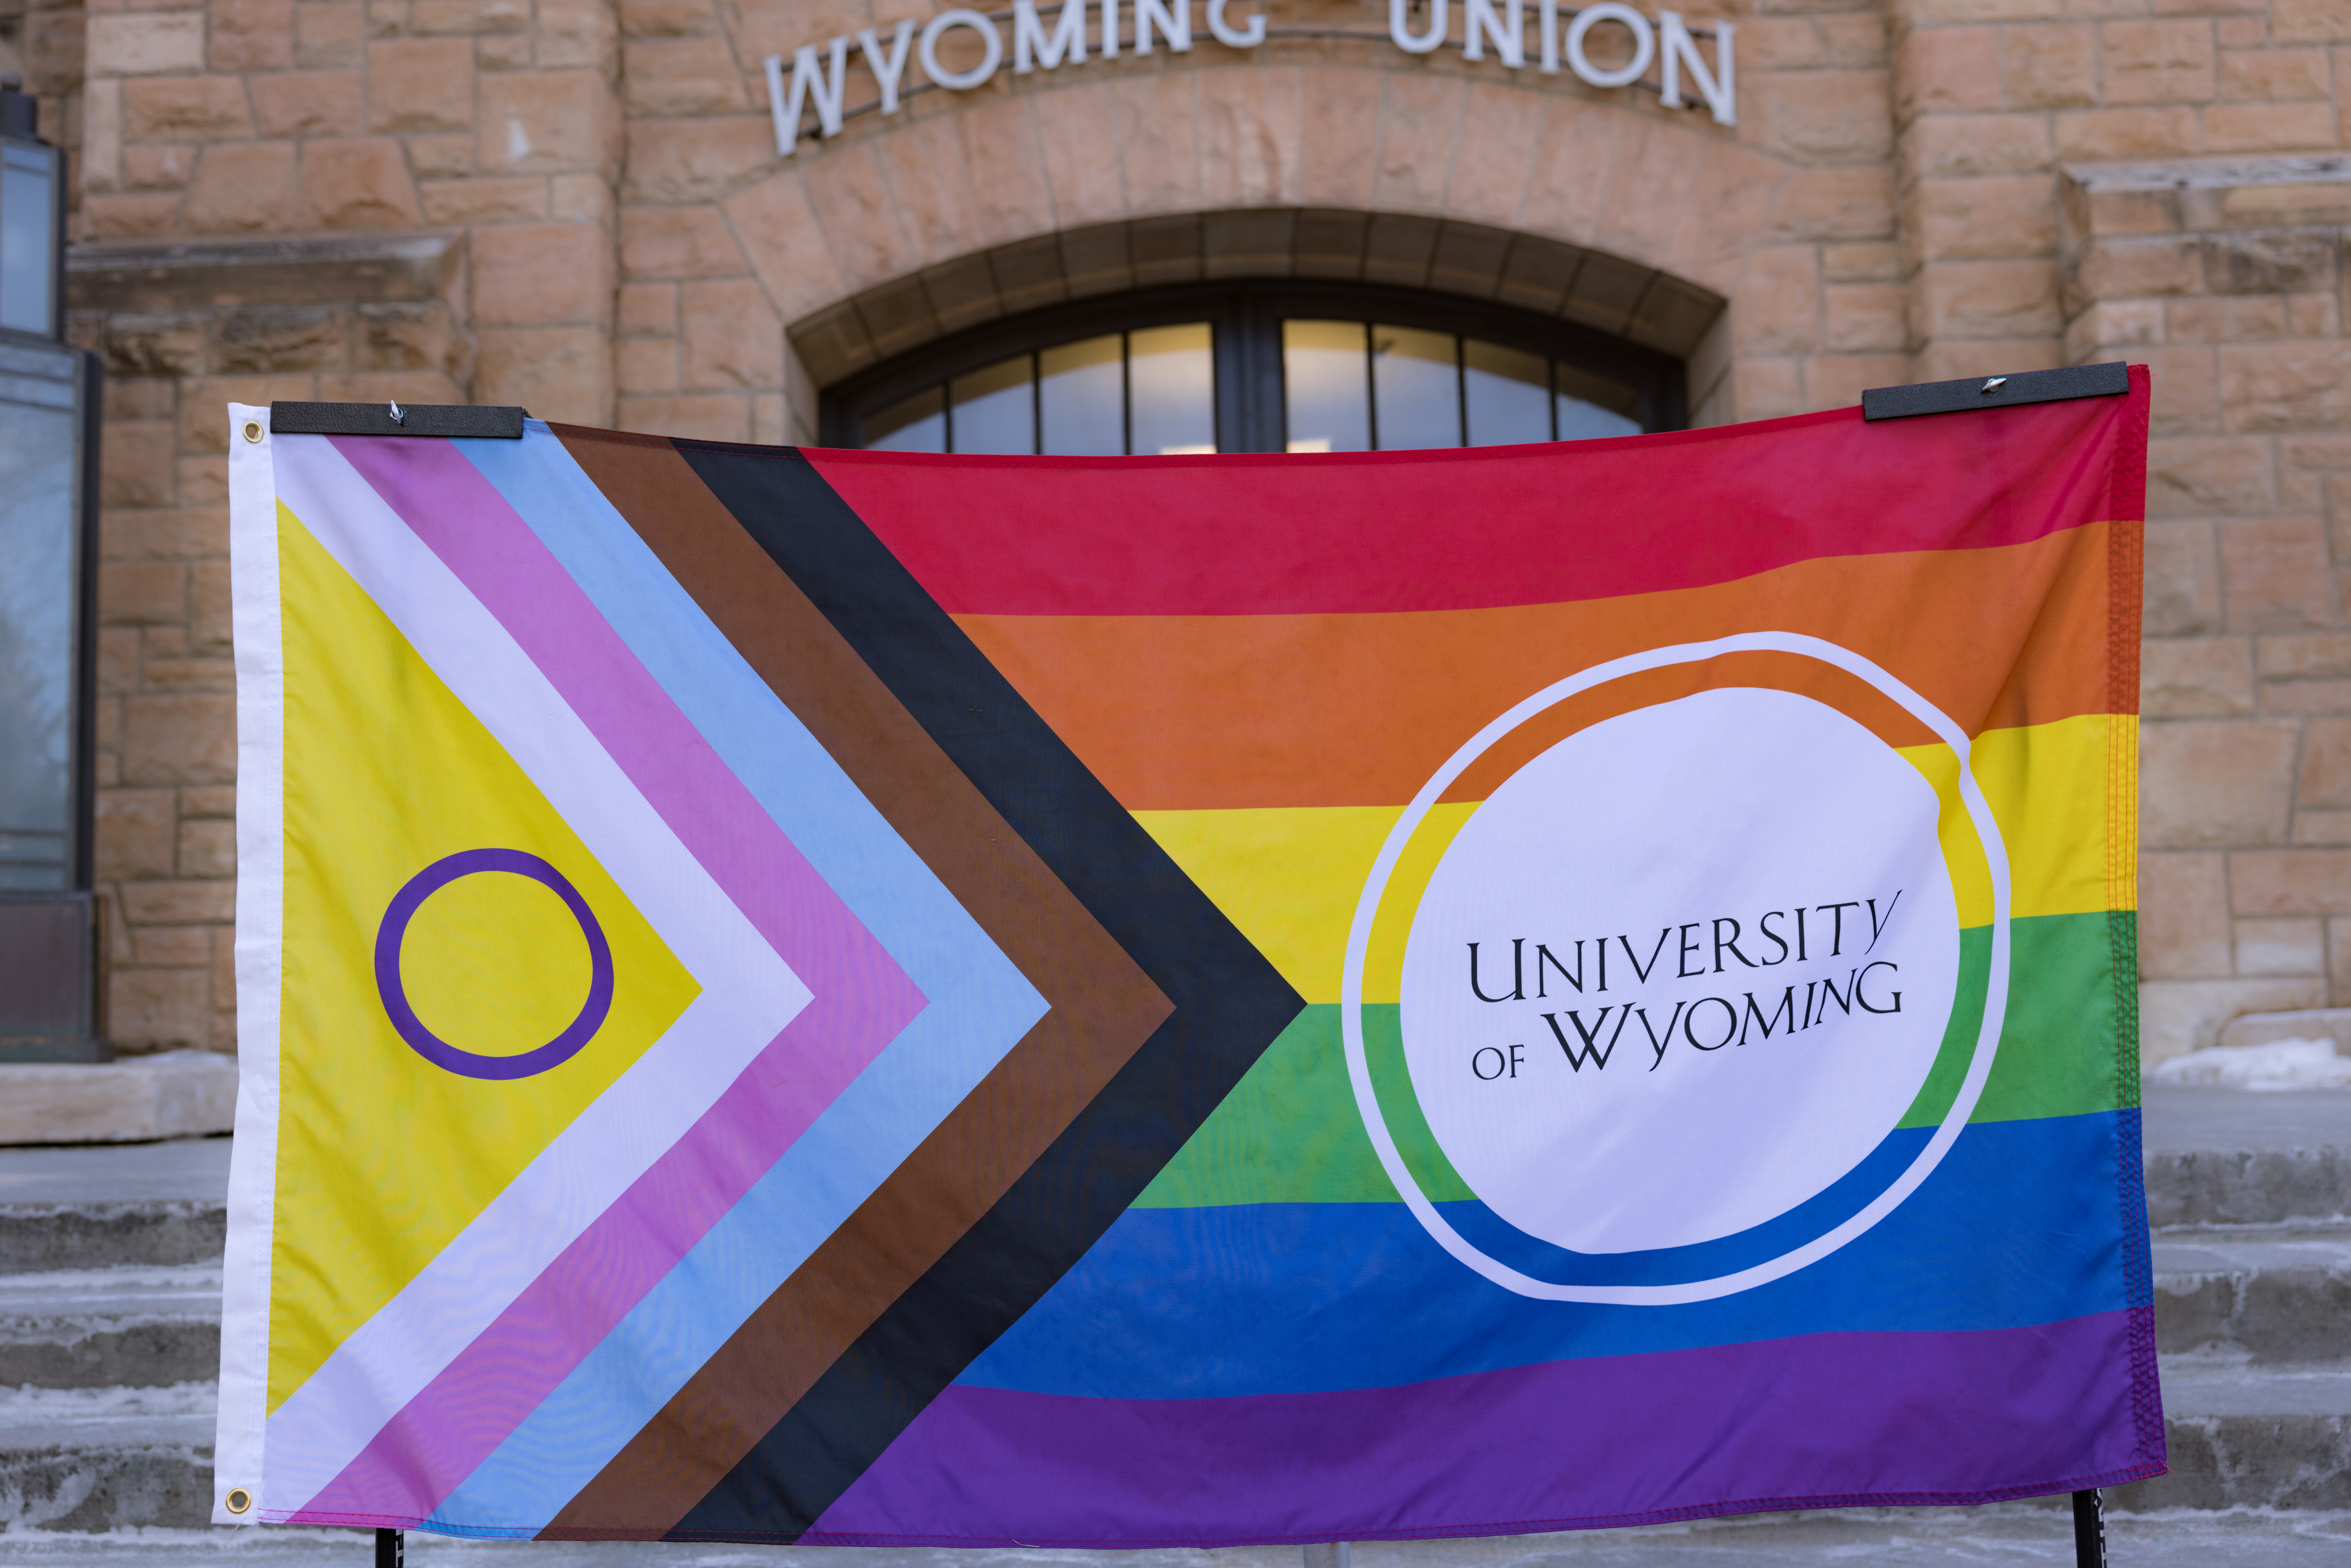 The Wyoming Union building outside with a pride flag in front.